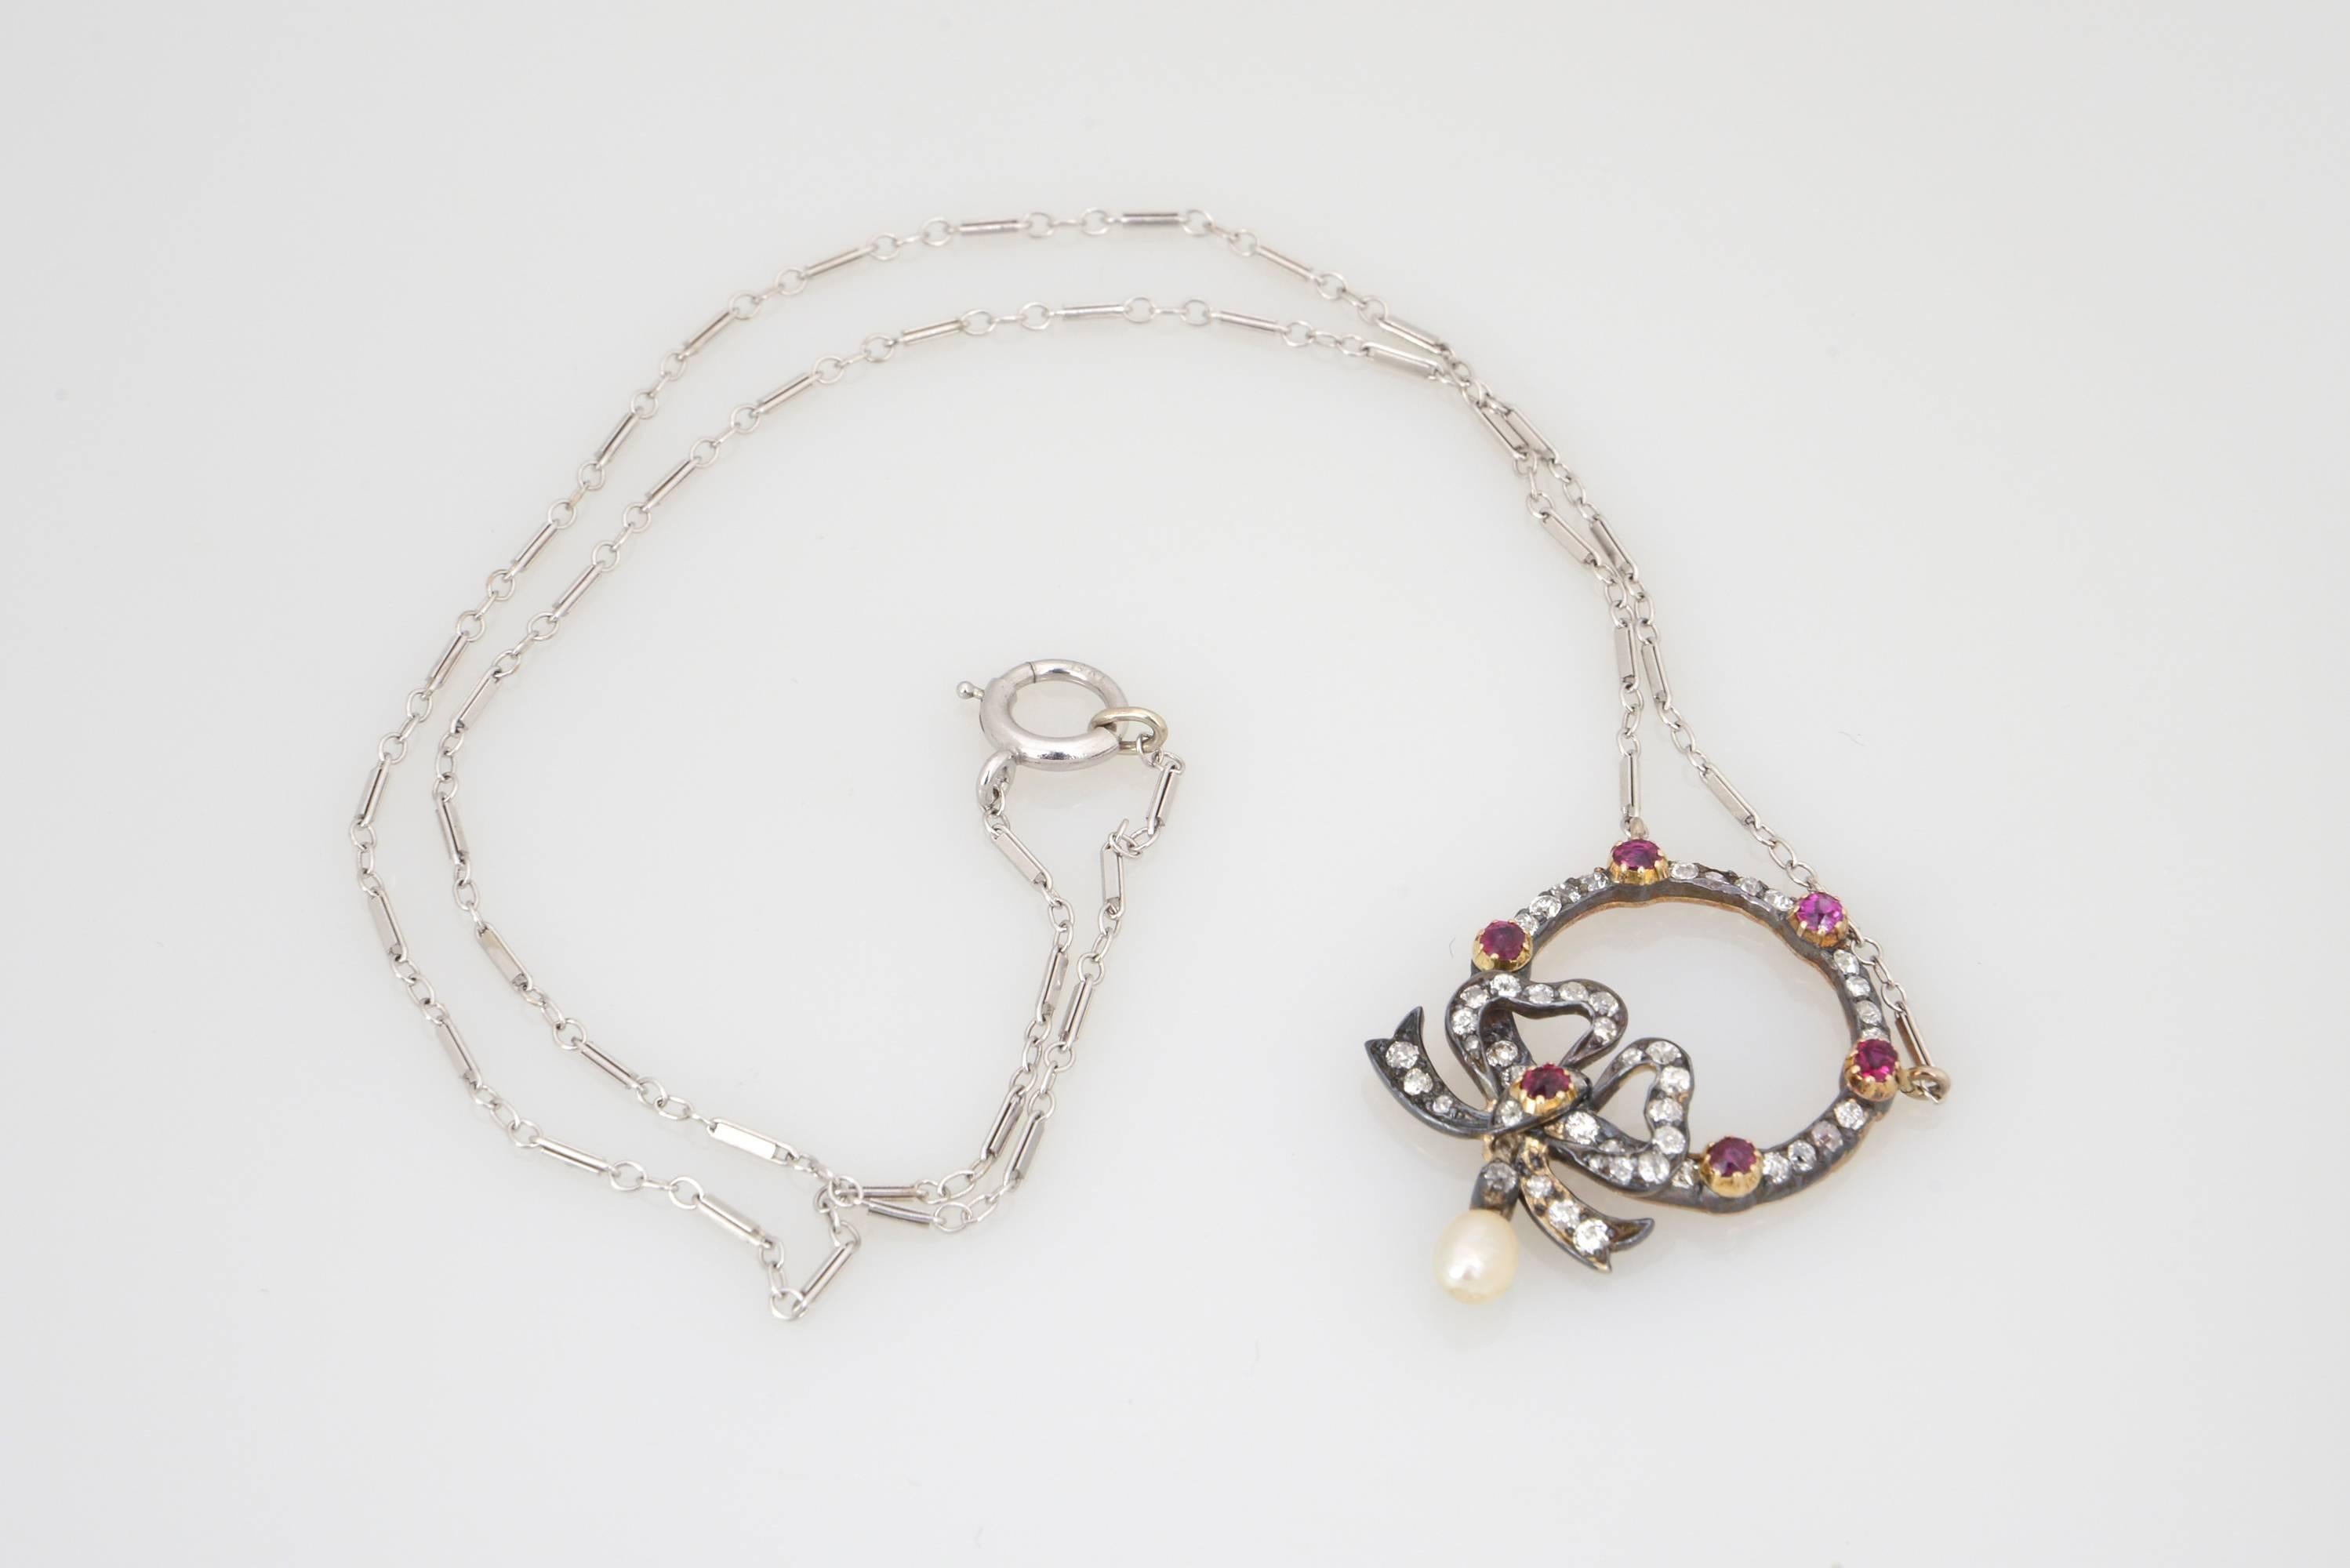 A rare and delicately crafted antique turn of the century Edwardian Belle Époque necklace pendant with an emblematic for that period bow design. The pendant is made of silver on gold with the gems set in silver. Finished with a very nice and fine